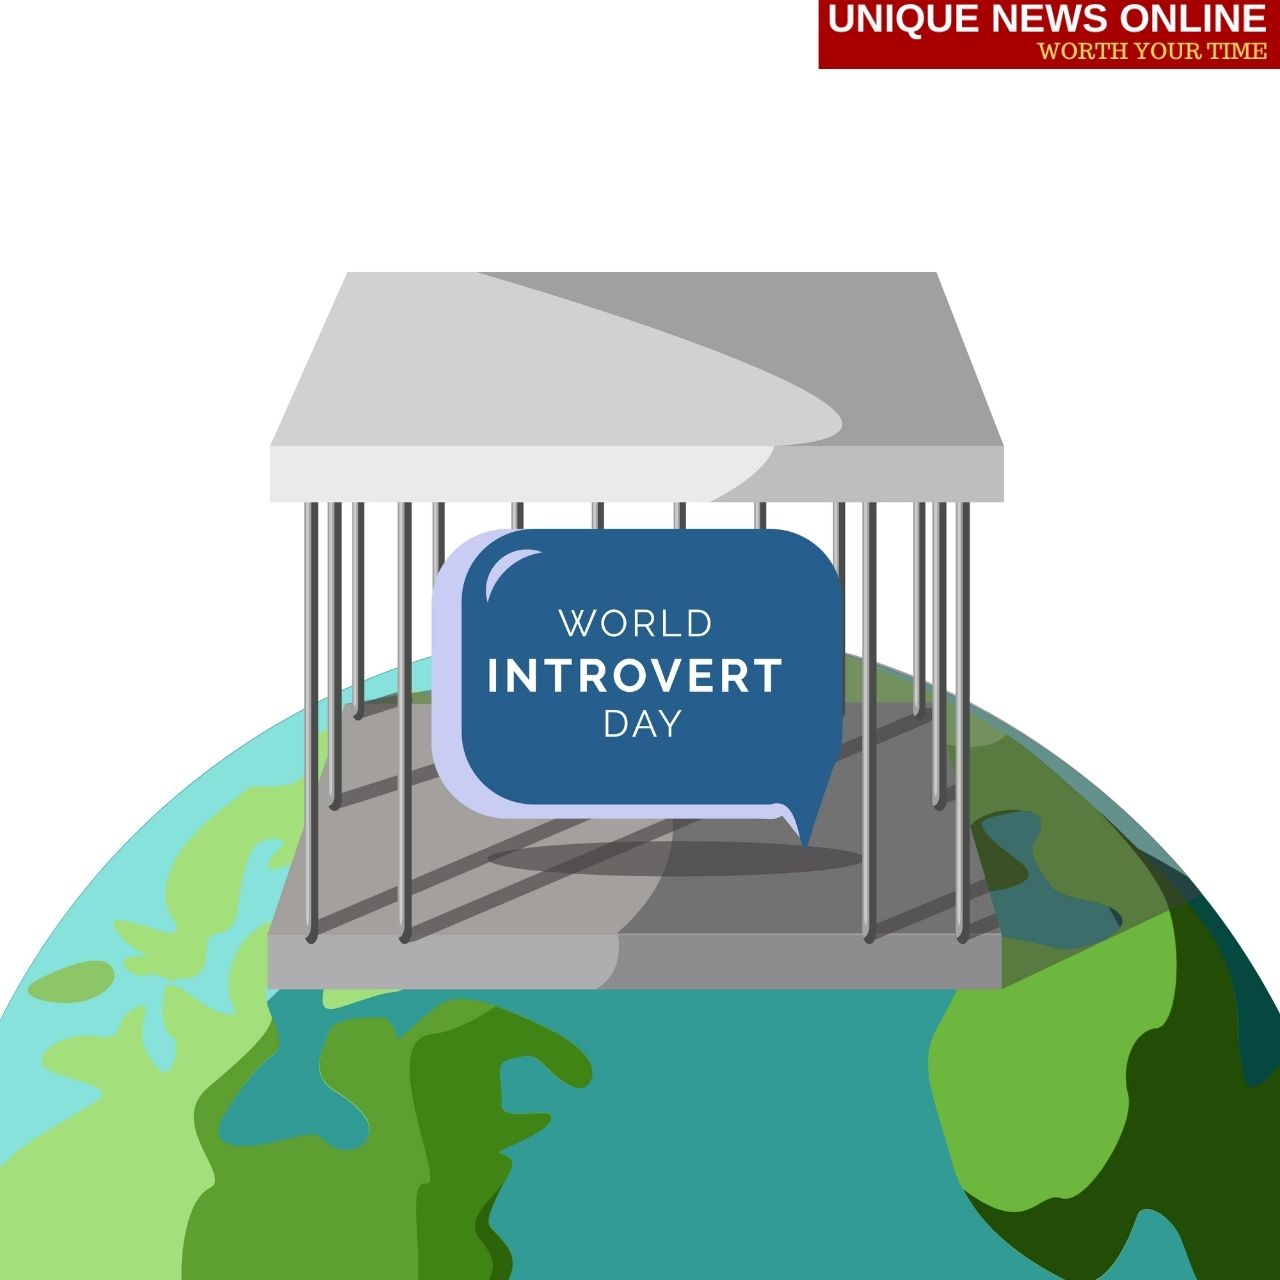 World Introvert Day 2022 Quotes, HD Images, Memes, Greetings, Messages to share